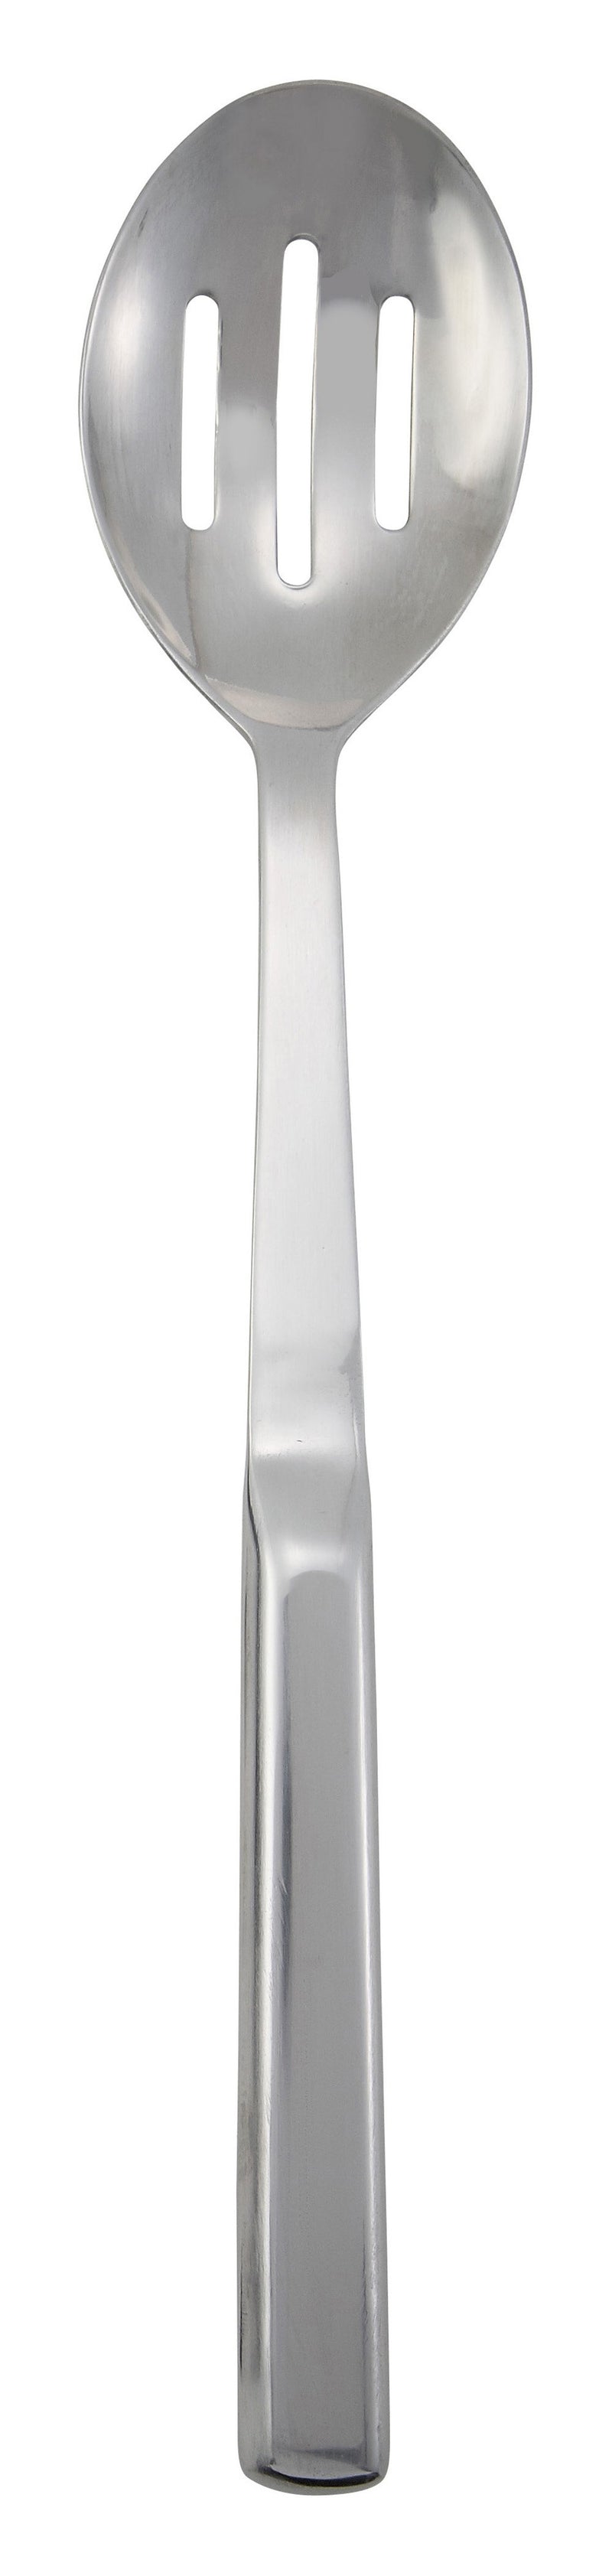 Stainless Steel 11.75" Slotted Spoon, Hollow Handle